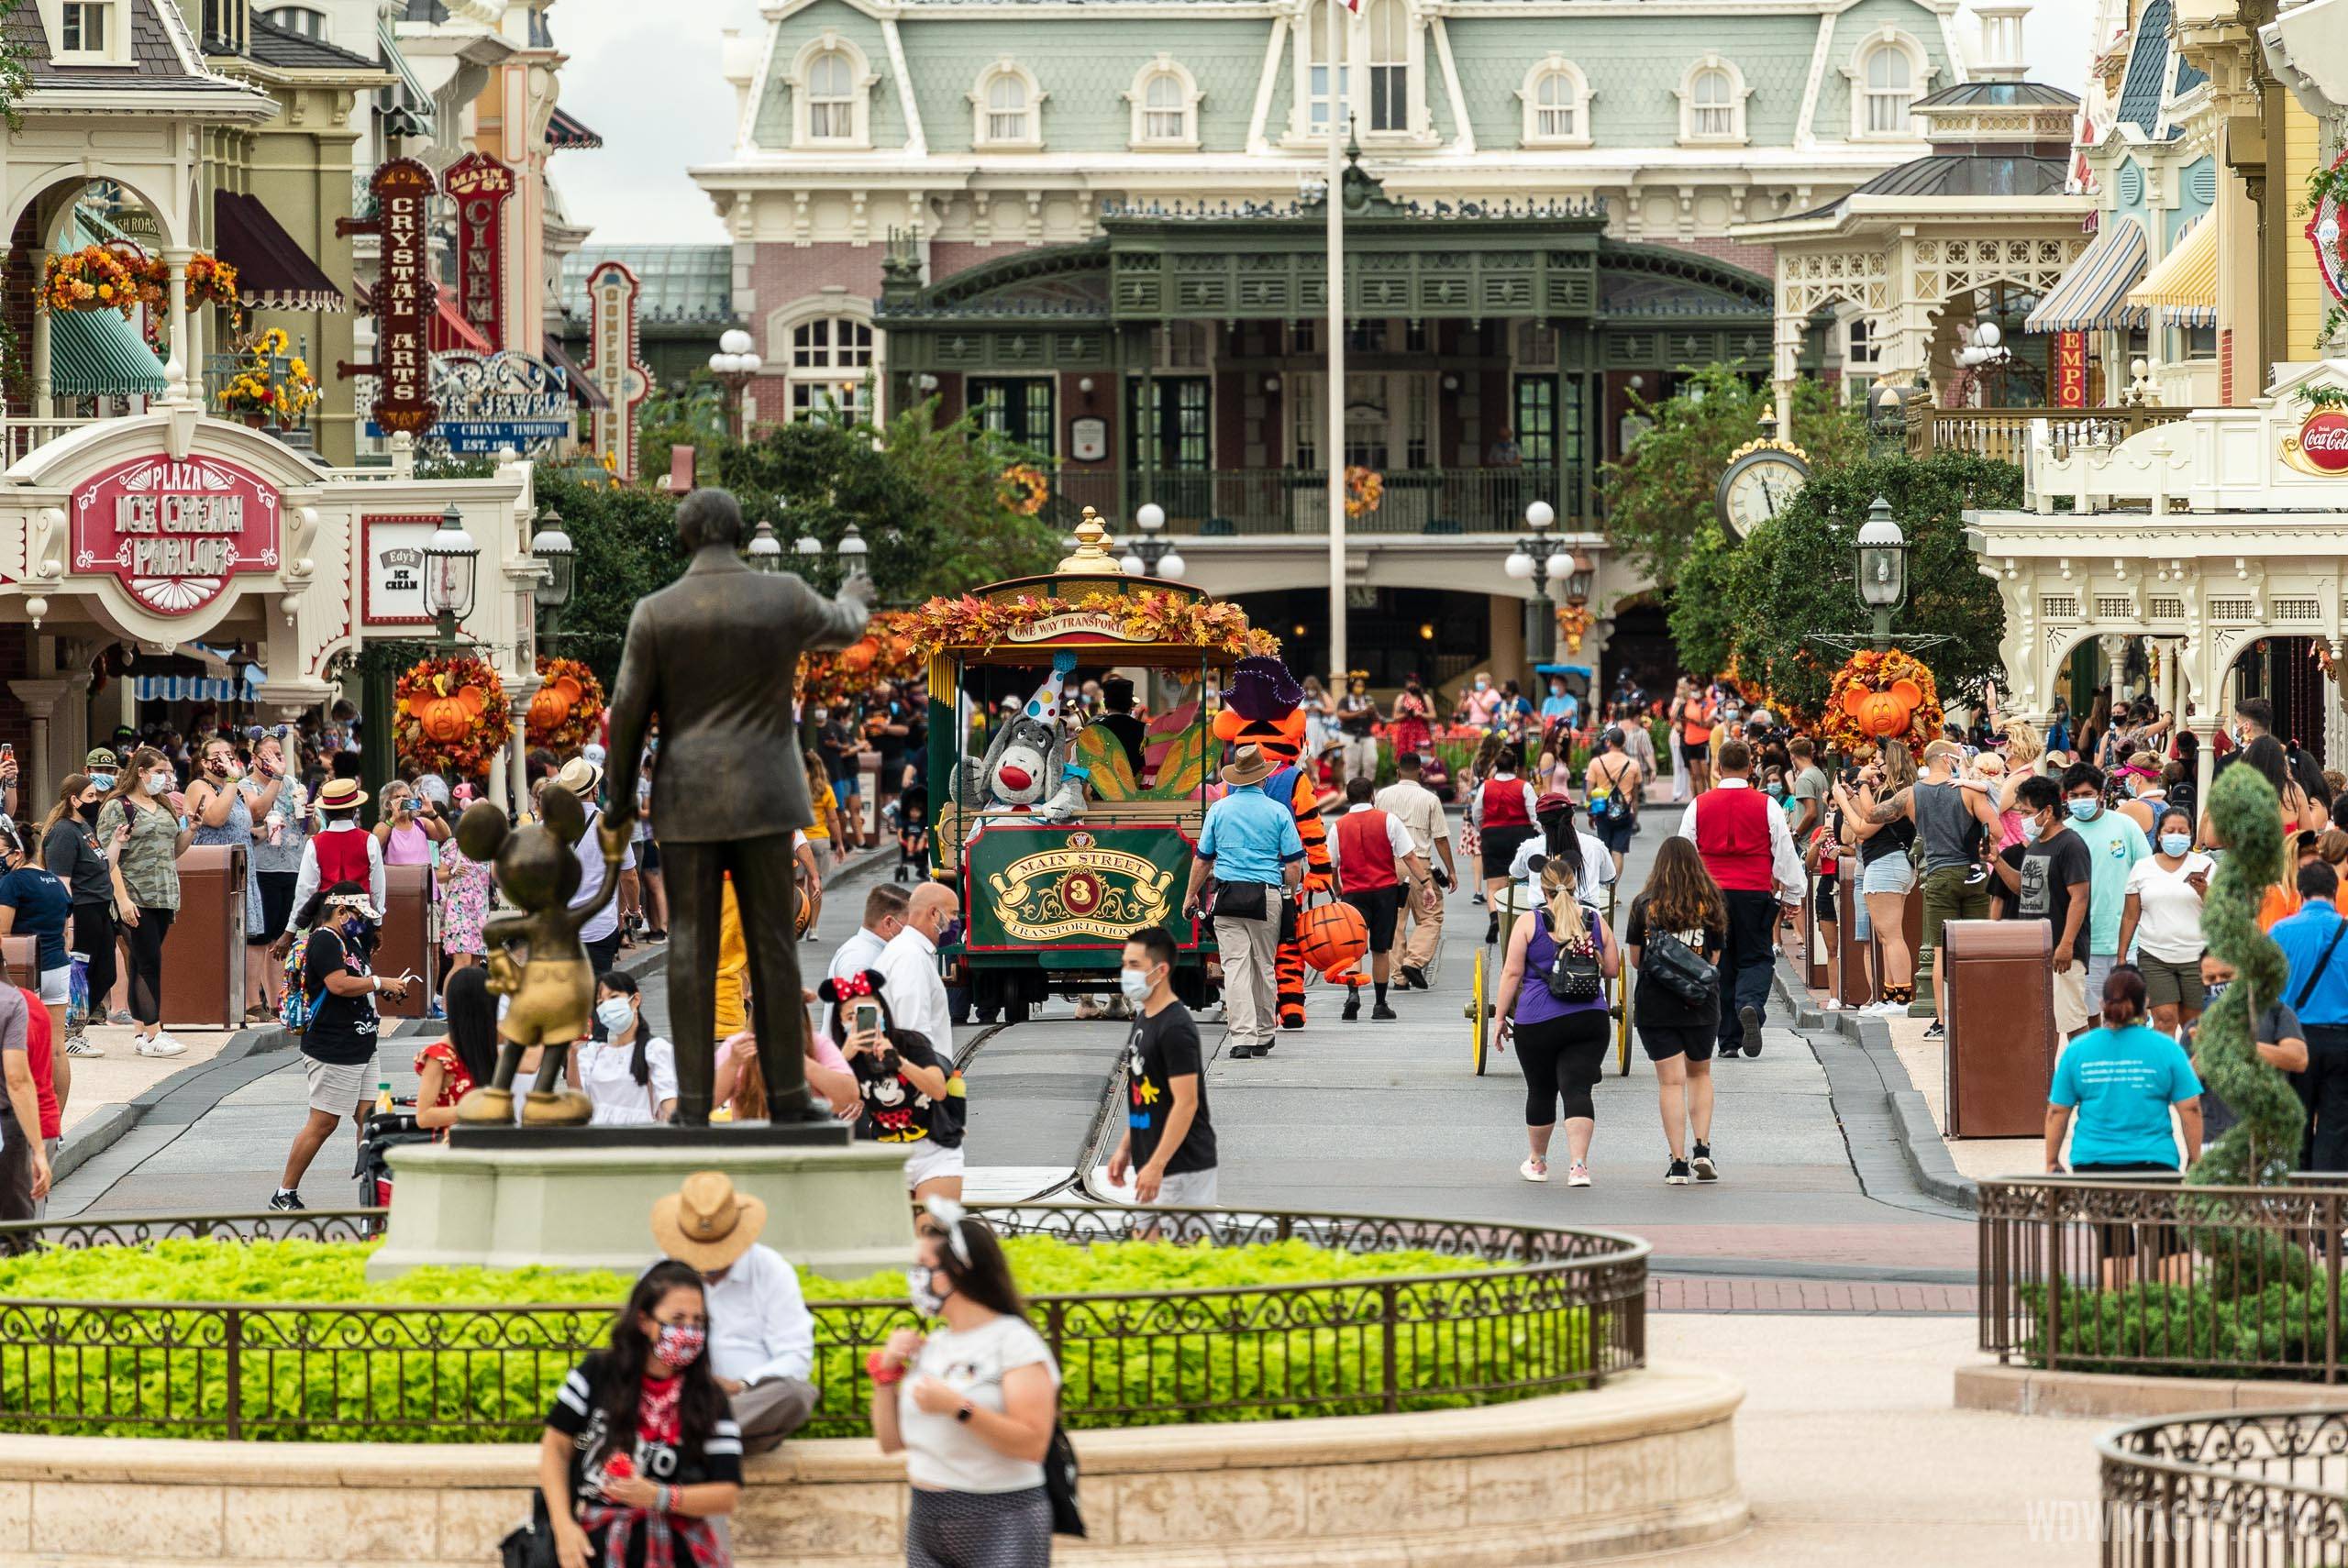 Walt Disney World is continuing its phased reopening with capacity restrictions